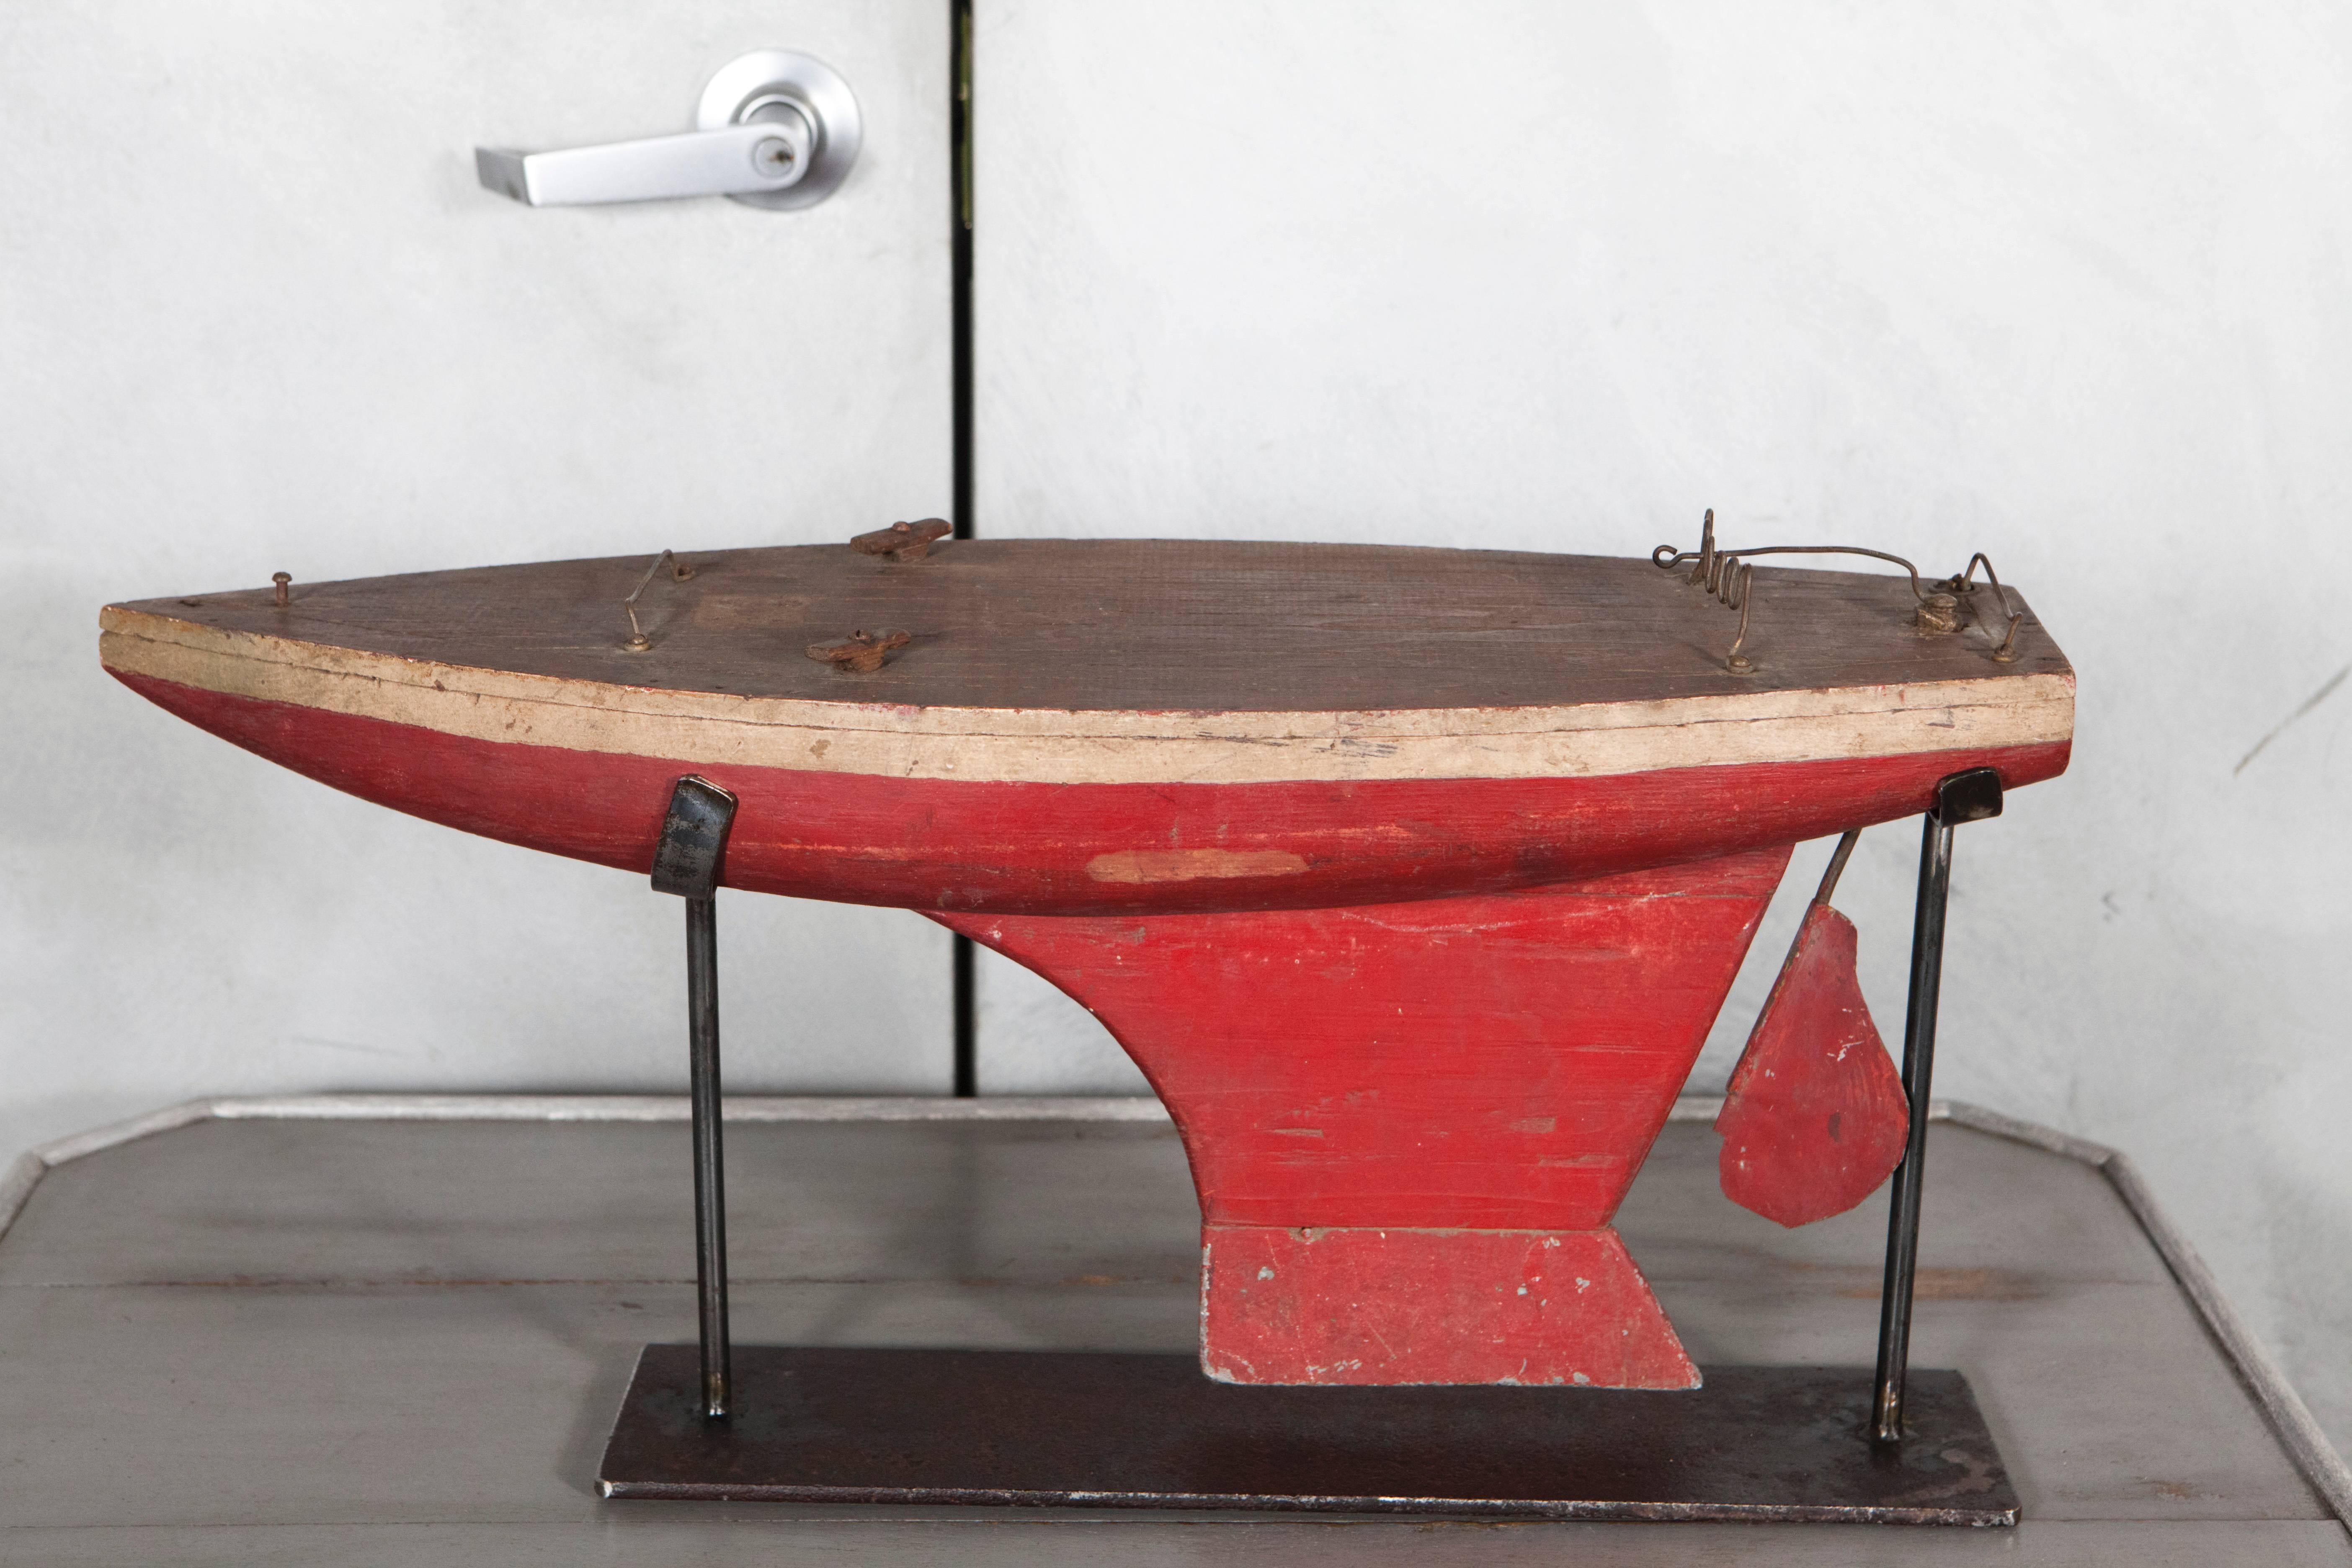 This nice vintage pond boat hull has a wood deck with various metal elements that relate to the rudder. The body is painted in red and white with a nice patina showing that this boat was a vessel that took many a voyage. The piece has a custom